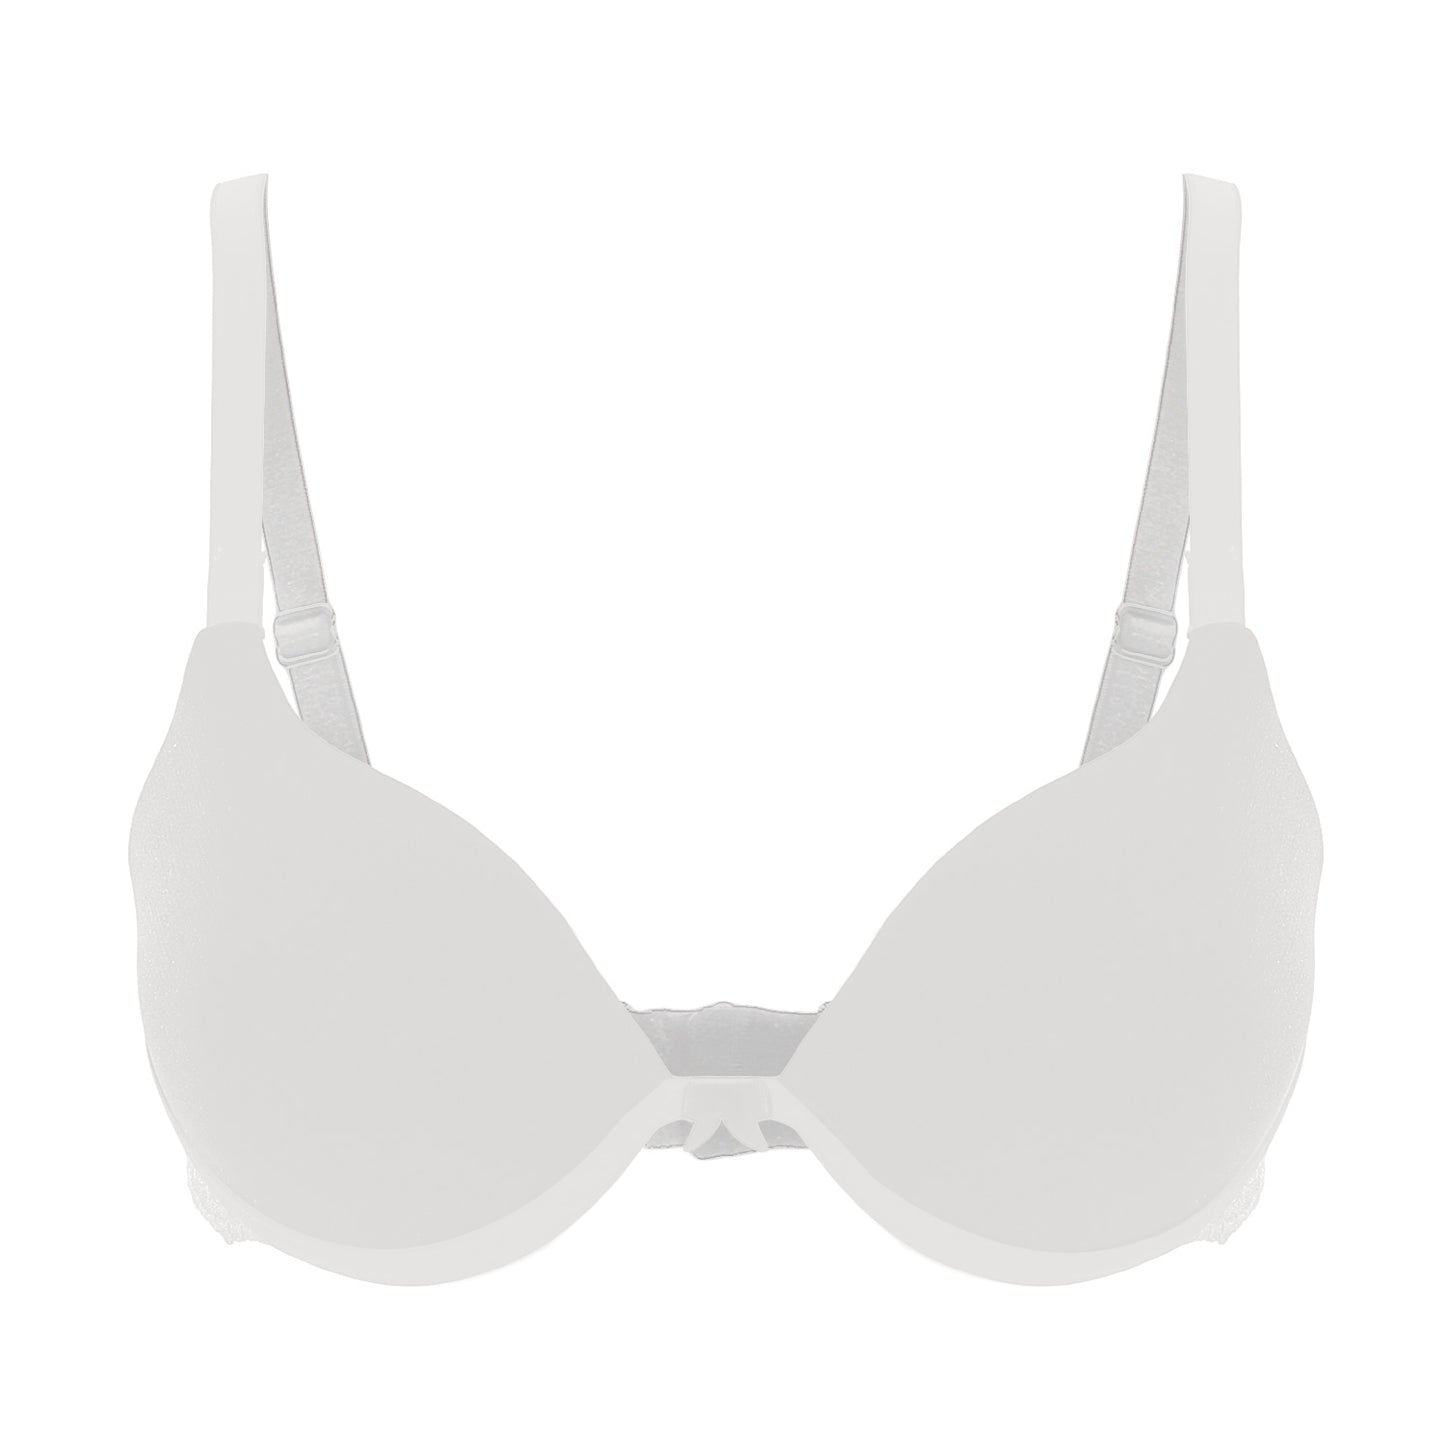 Buy Women's Cotton Front Hook Bra, White Front Hook Sexy Bra, New Deep  Panel and Molded Cups Regular Bra, Front Open, Deep Panel and Molded Cups  Regular Bra